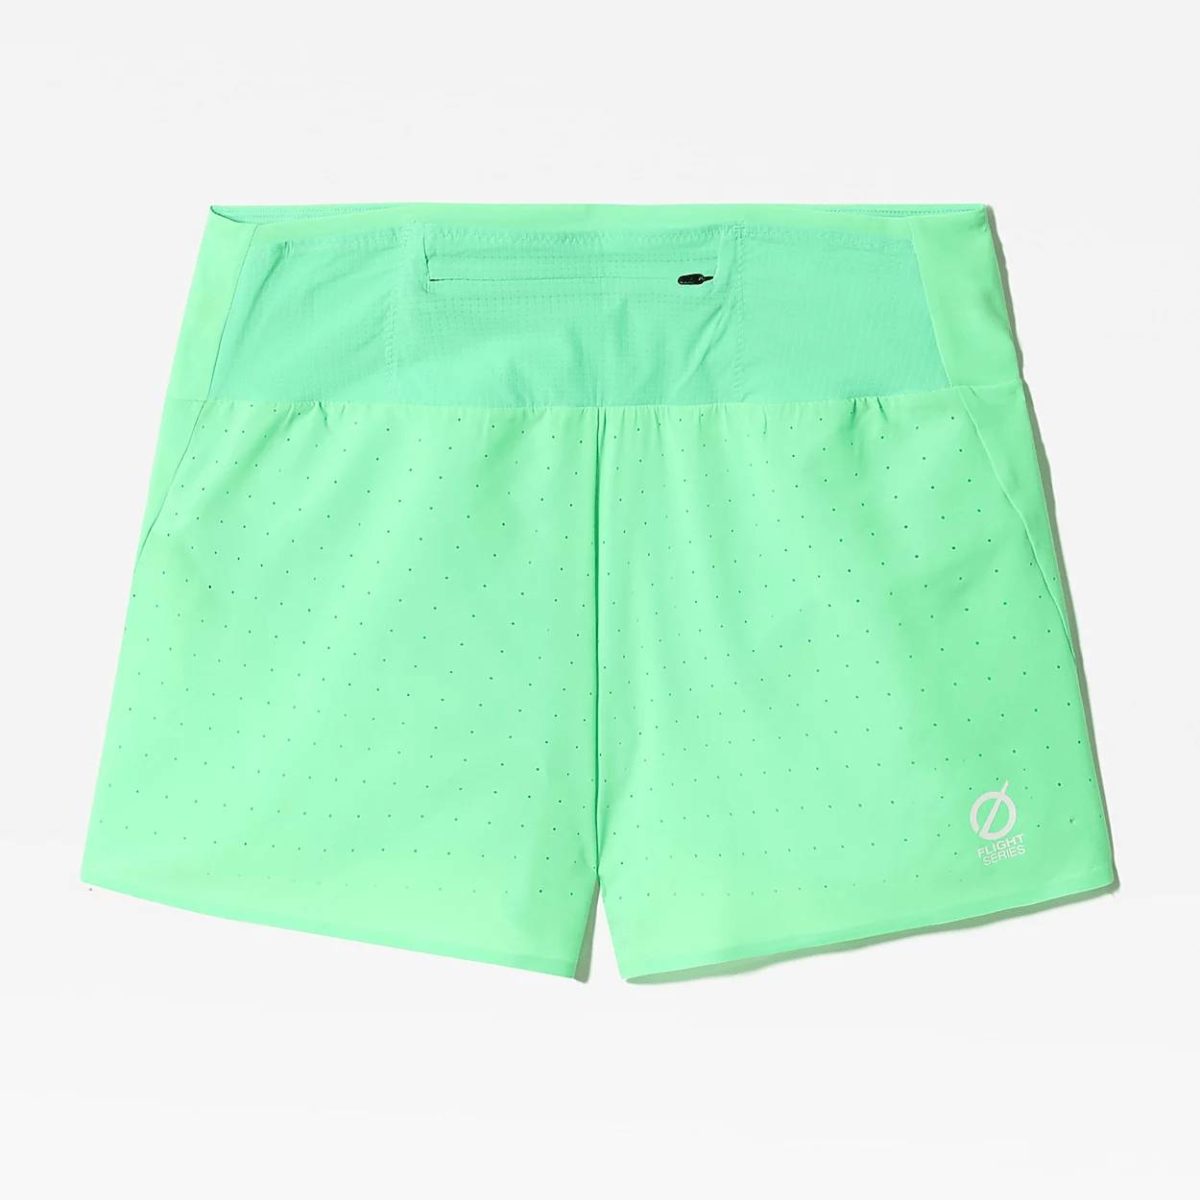 The North Face Womens stridelight Flight short at Fast and Light CH 002